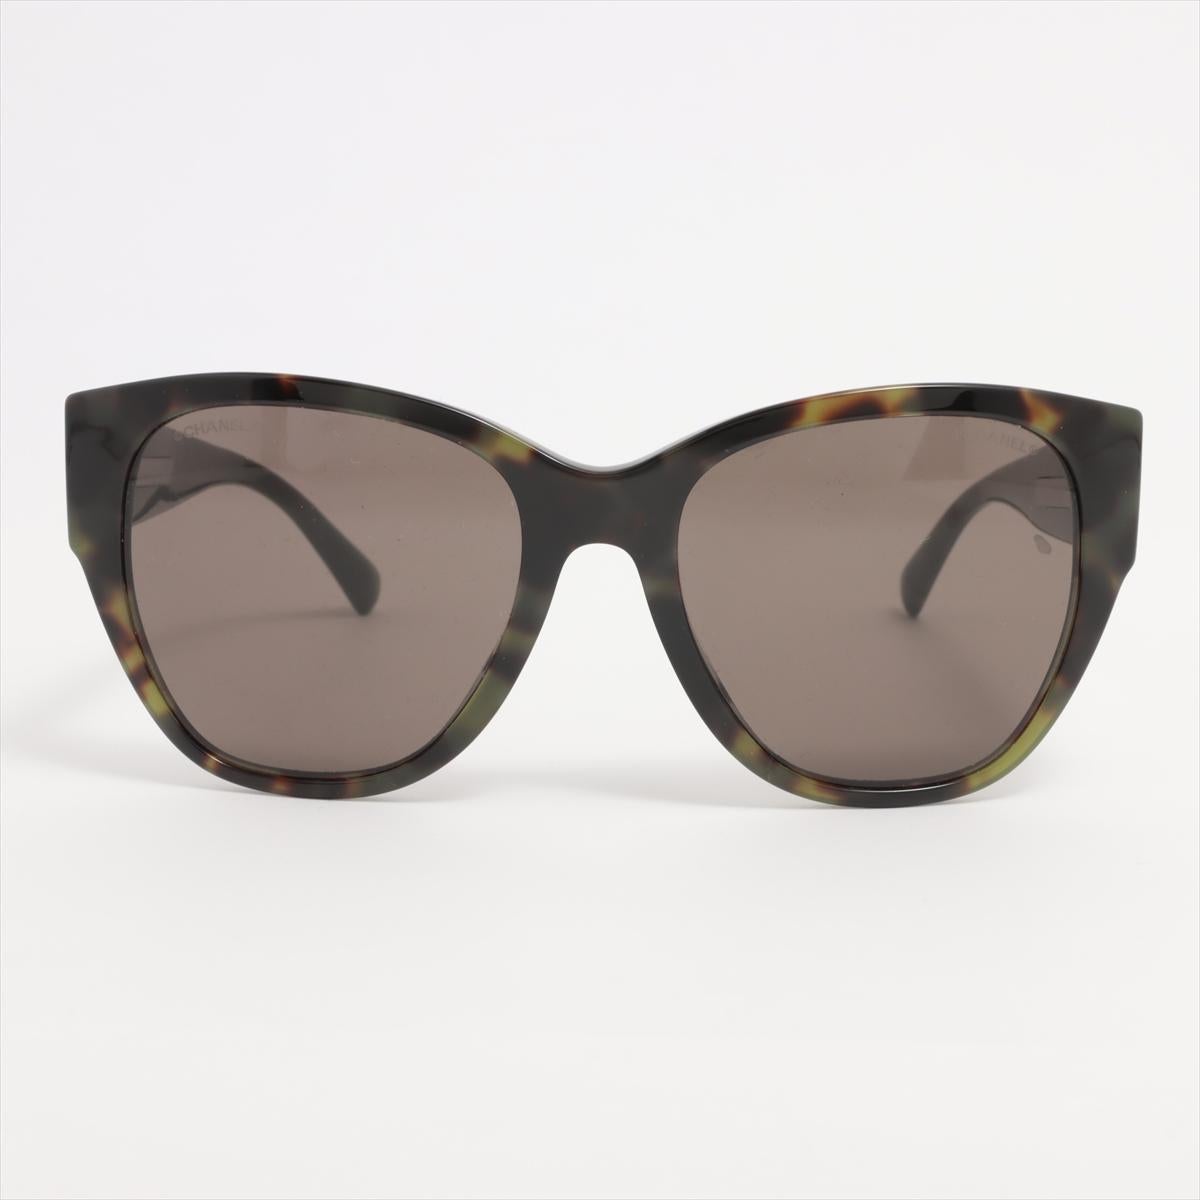 The Chanel CC Logo Brown Tortoise Shell Acetate Sunglasses are a glamorous and sophisticated eyewear choice that seamlessly fuses classic design with modern allure. Crafted from high-quality tortoise shell acetate, the frames exude a rich brown hue,